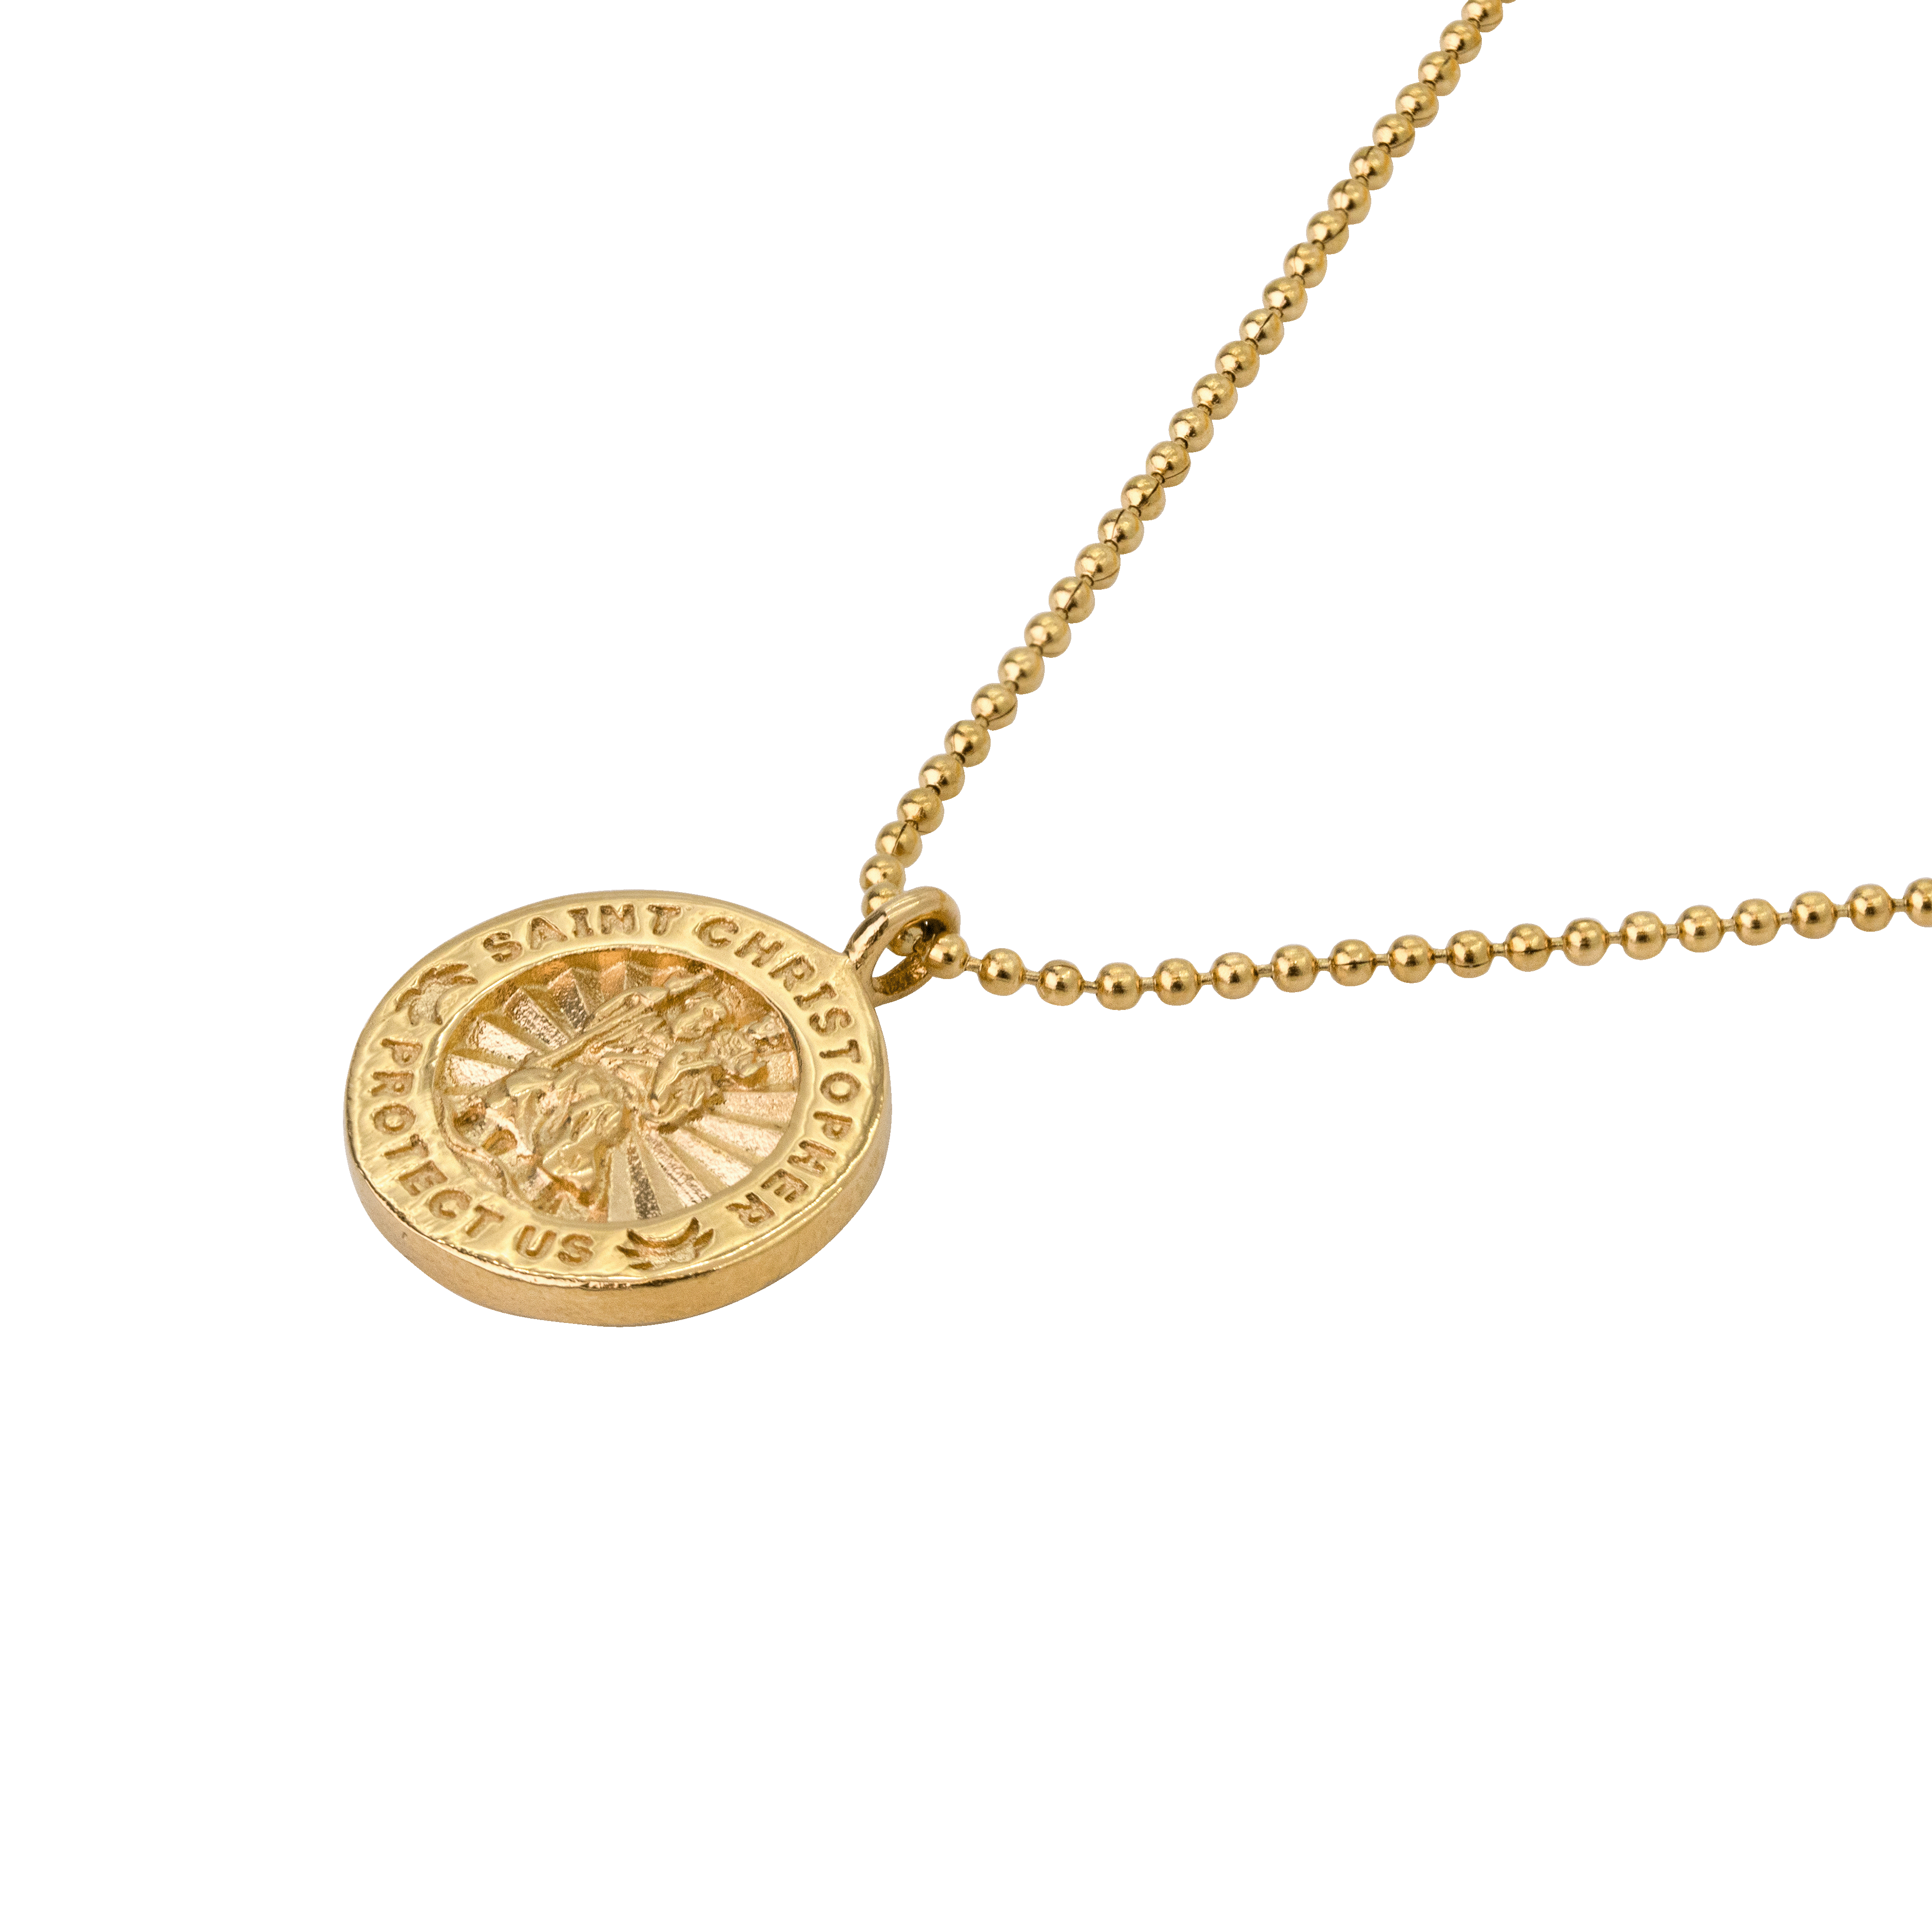 Luxury Vintage Gold Gold St Christopher Necklace With 18K Chain Pendant  Classic Style, Never Fading, Top Quality 2022 Official Latest Model For Men  And Women From Sunglasses_watch99, $47.74 | DHgate.Com